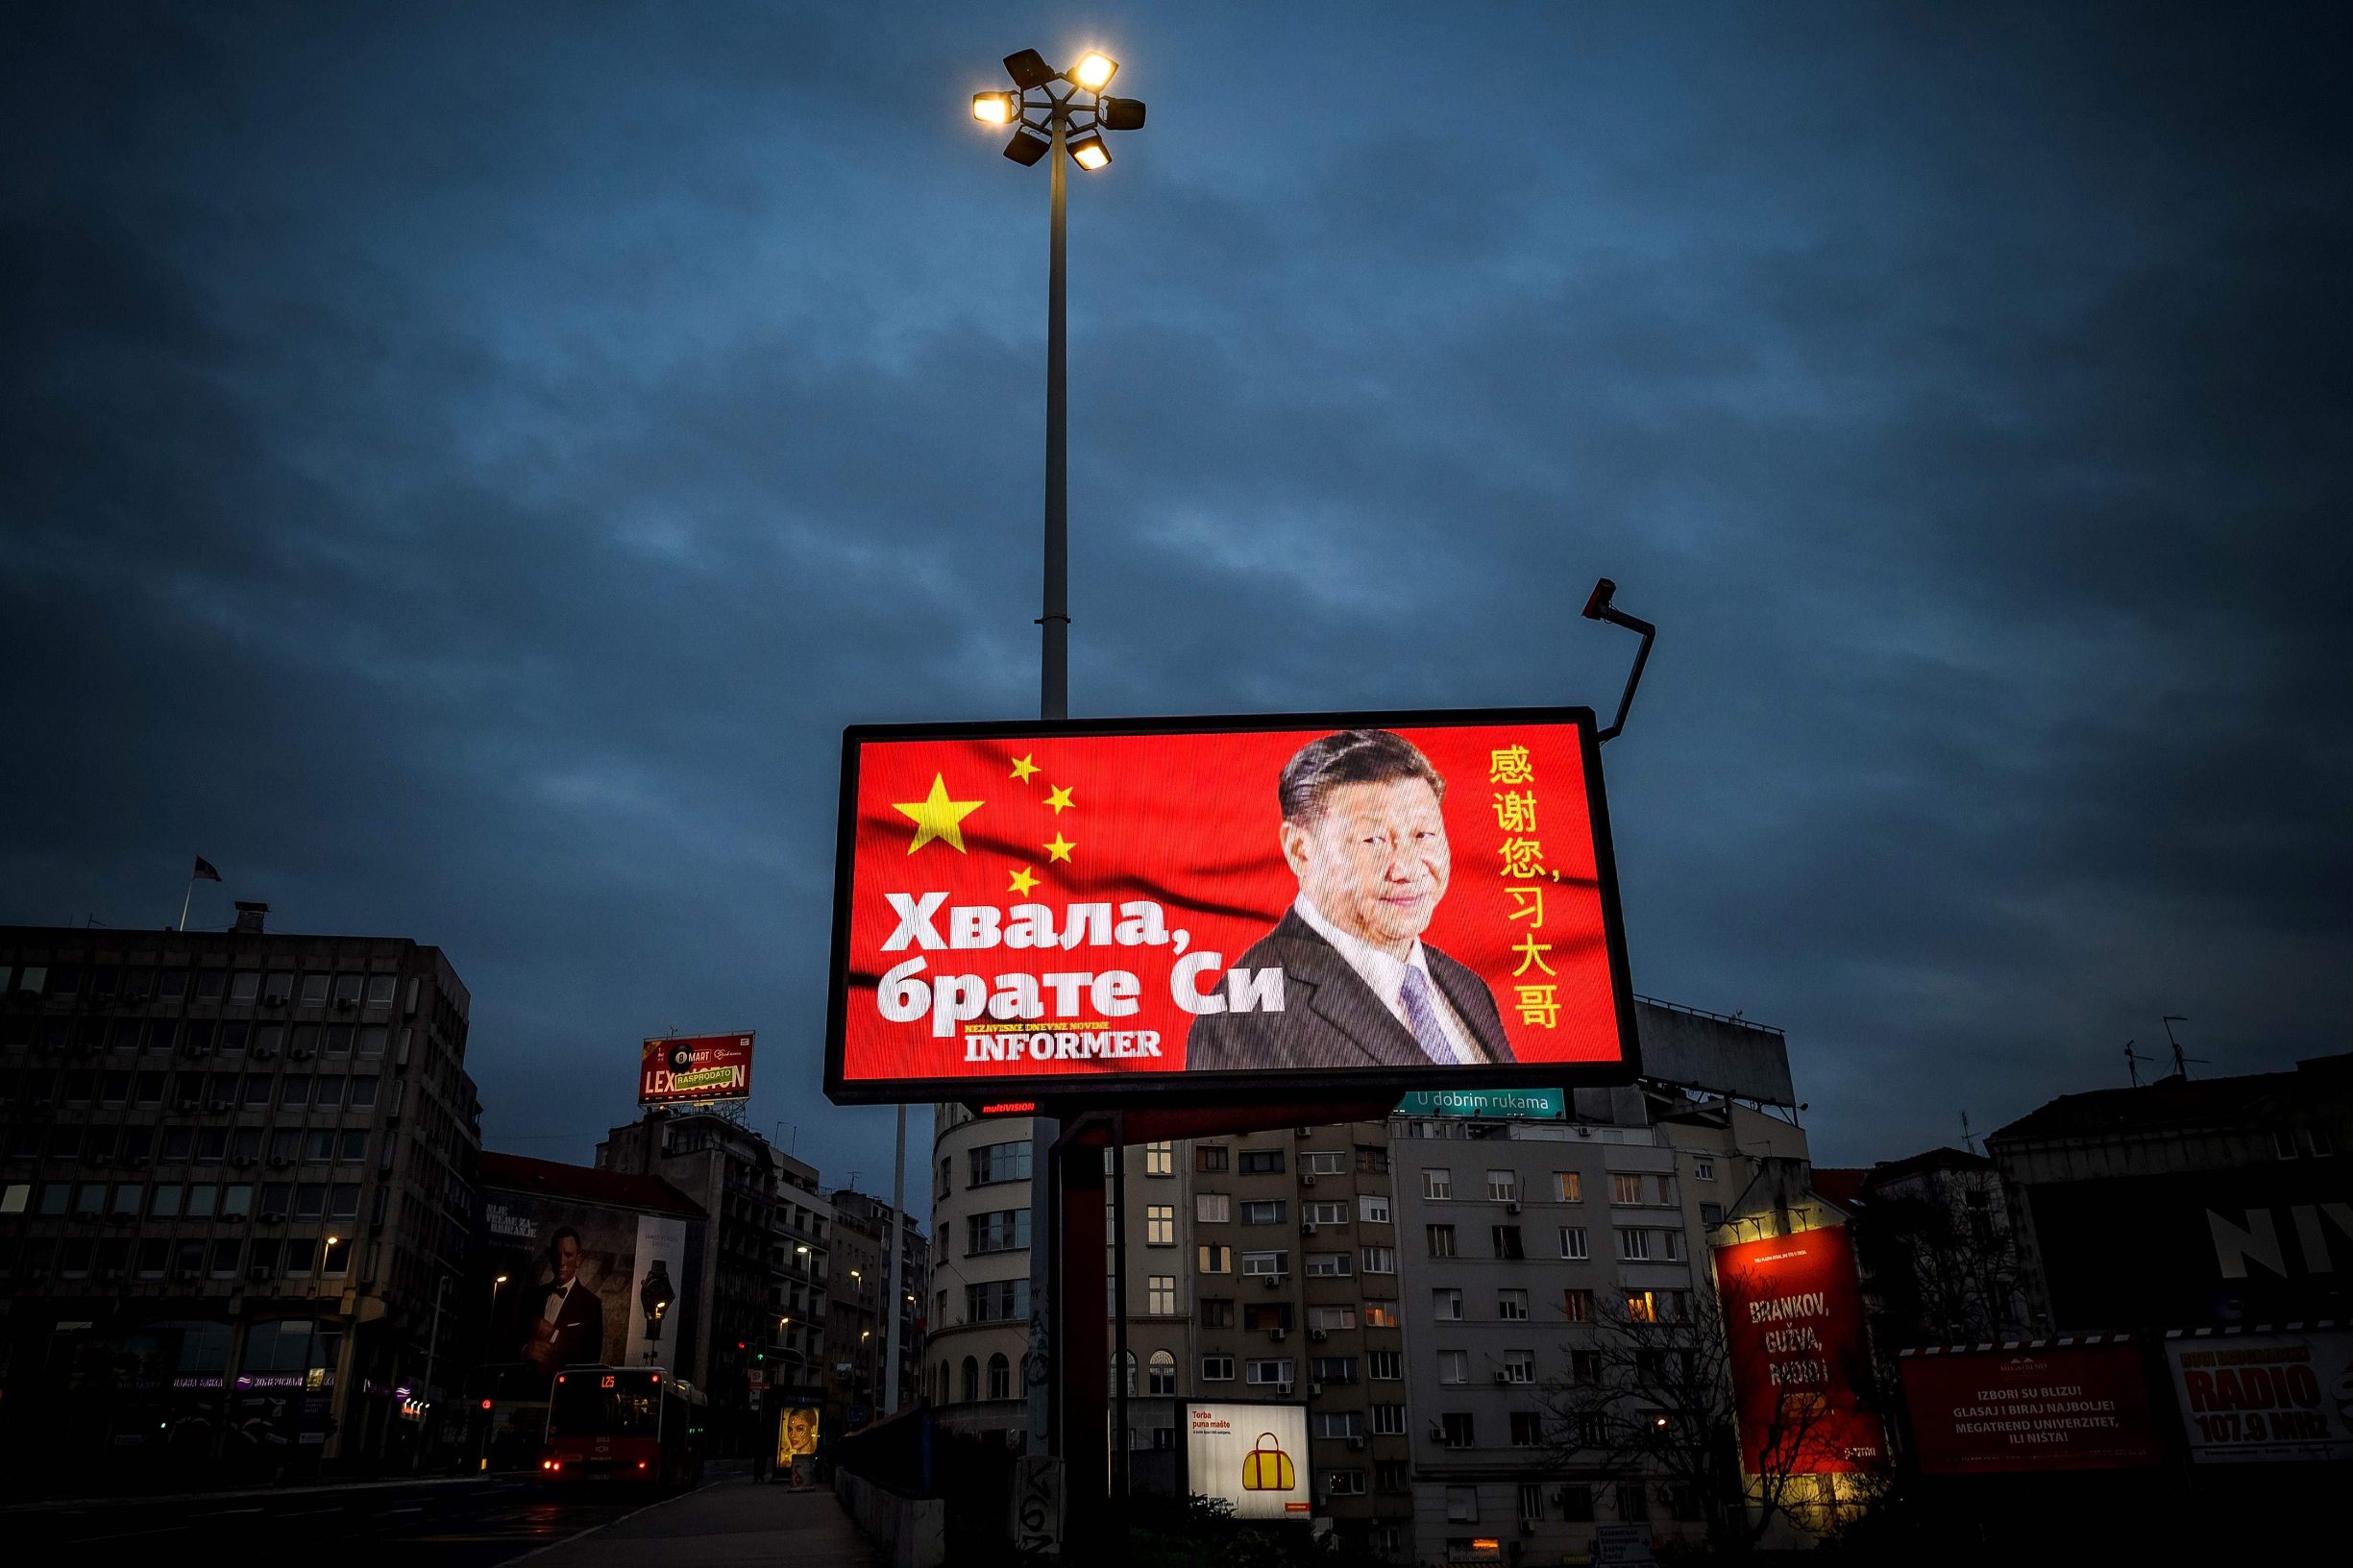 A picture taken on March 30, 2020, shows a billboard bearing Chinese President Xi Jinping's face looking down over a boulevard next to the words 